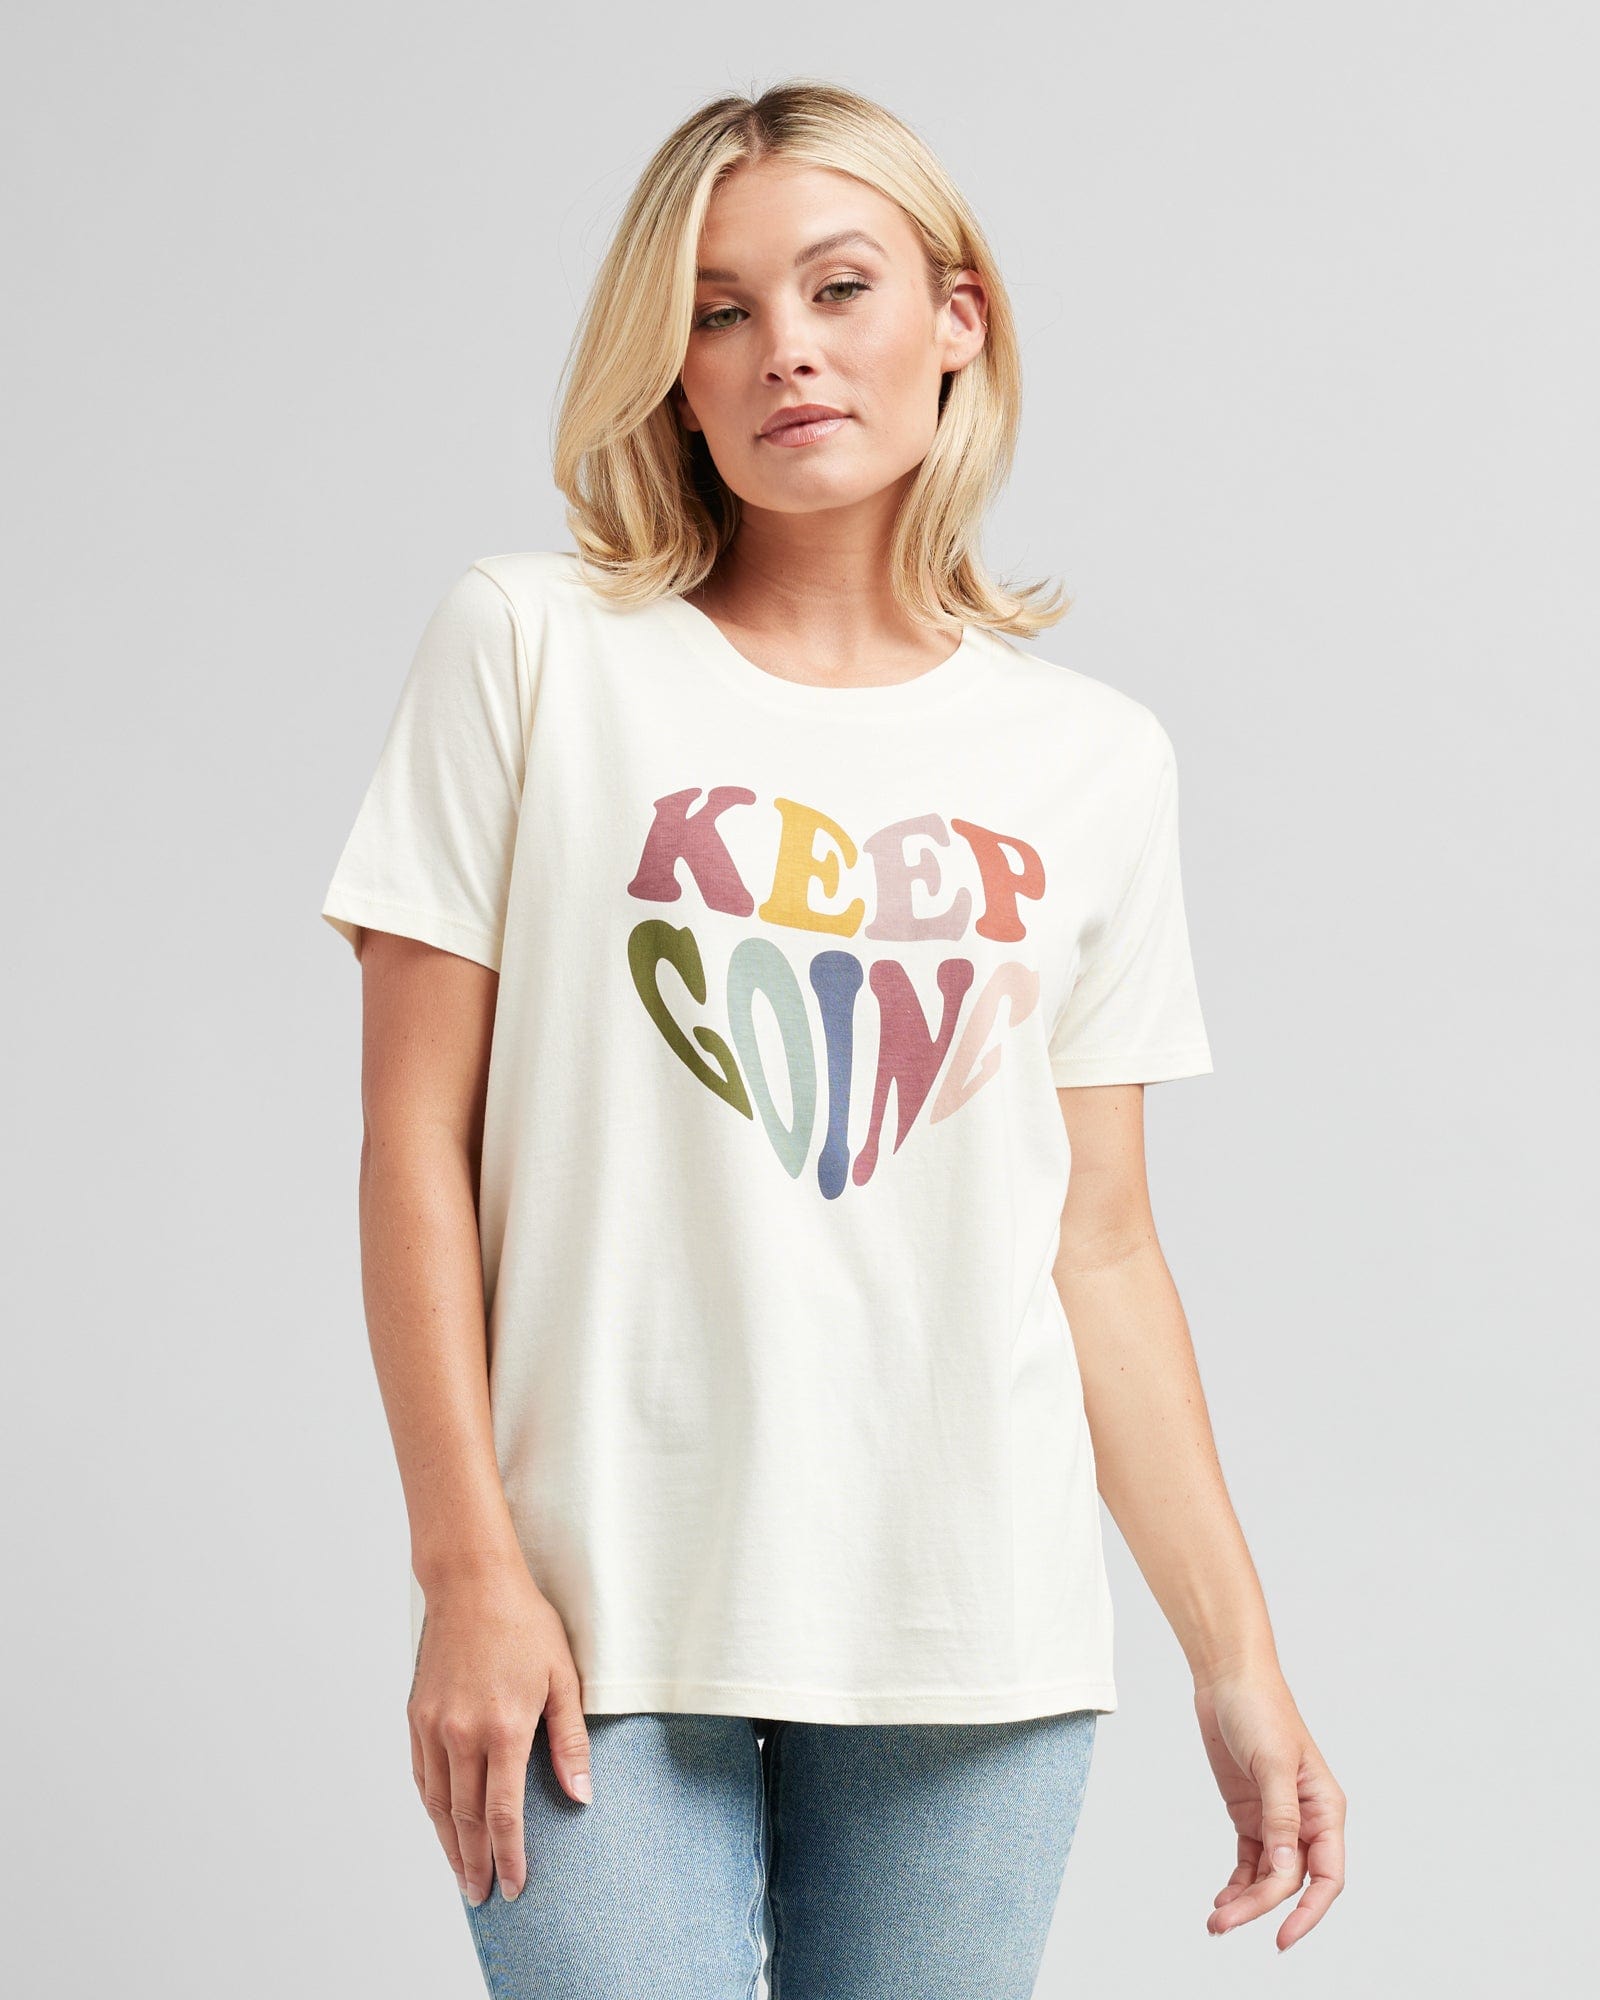 Woman in a short sleeve, white graphic tee that says "Keep Going"